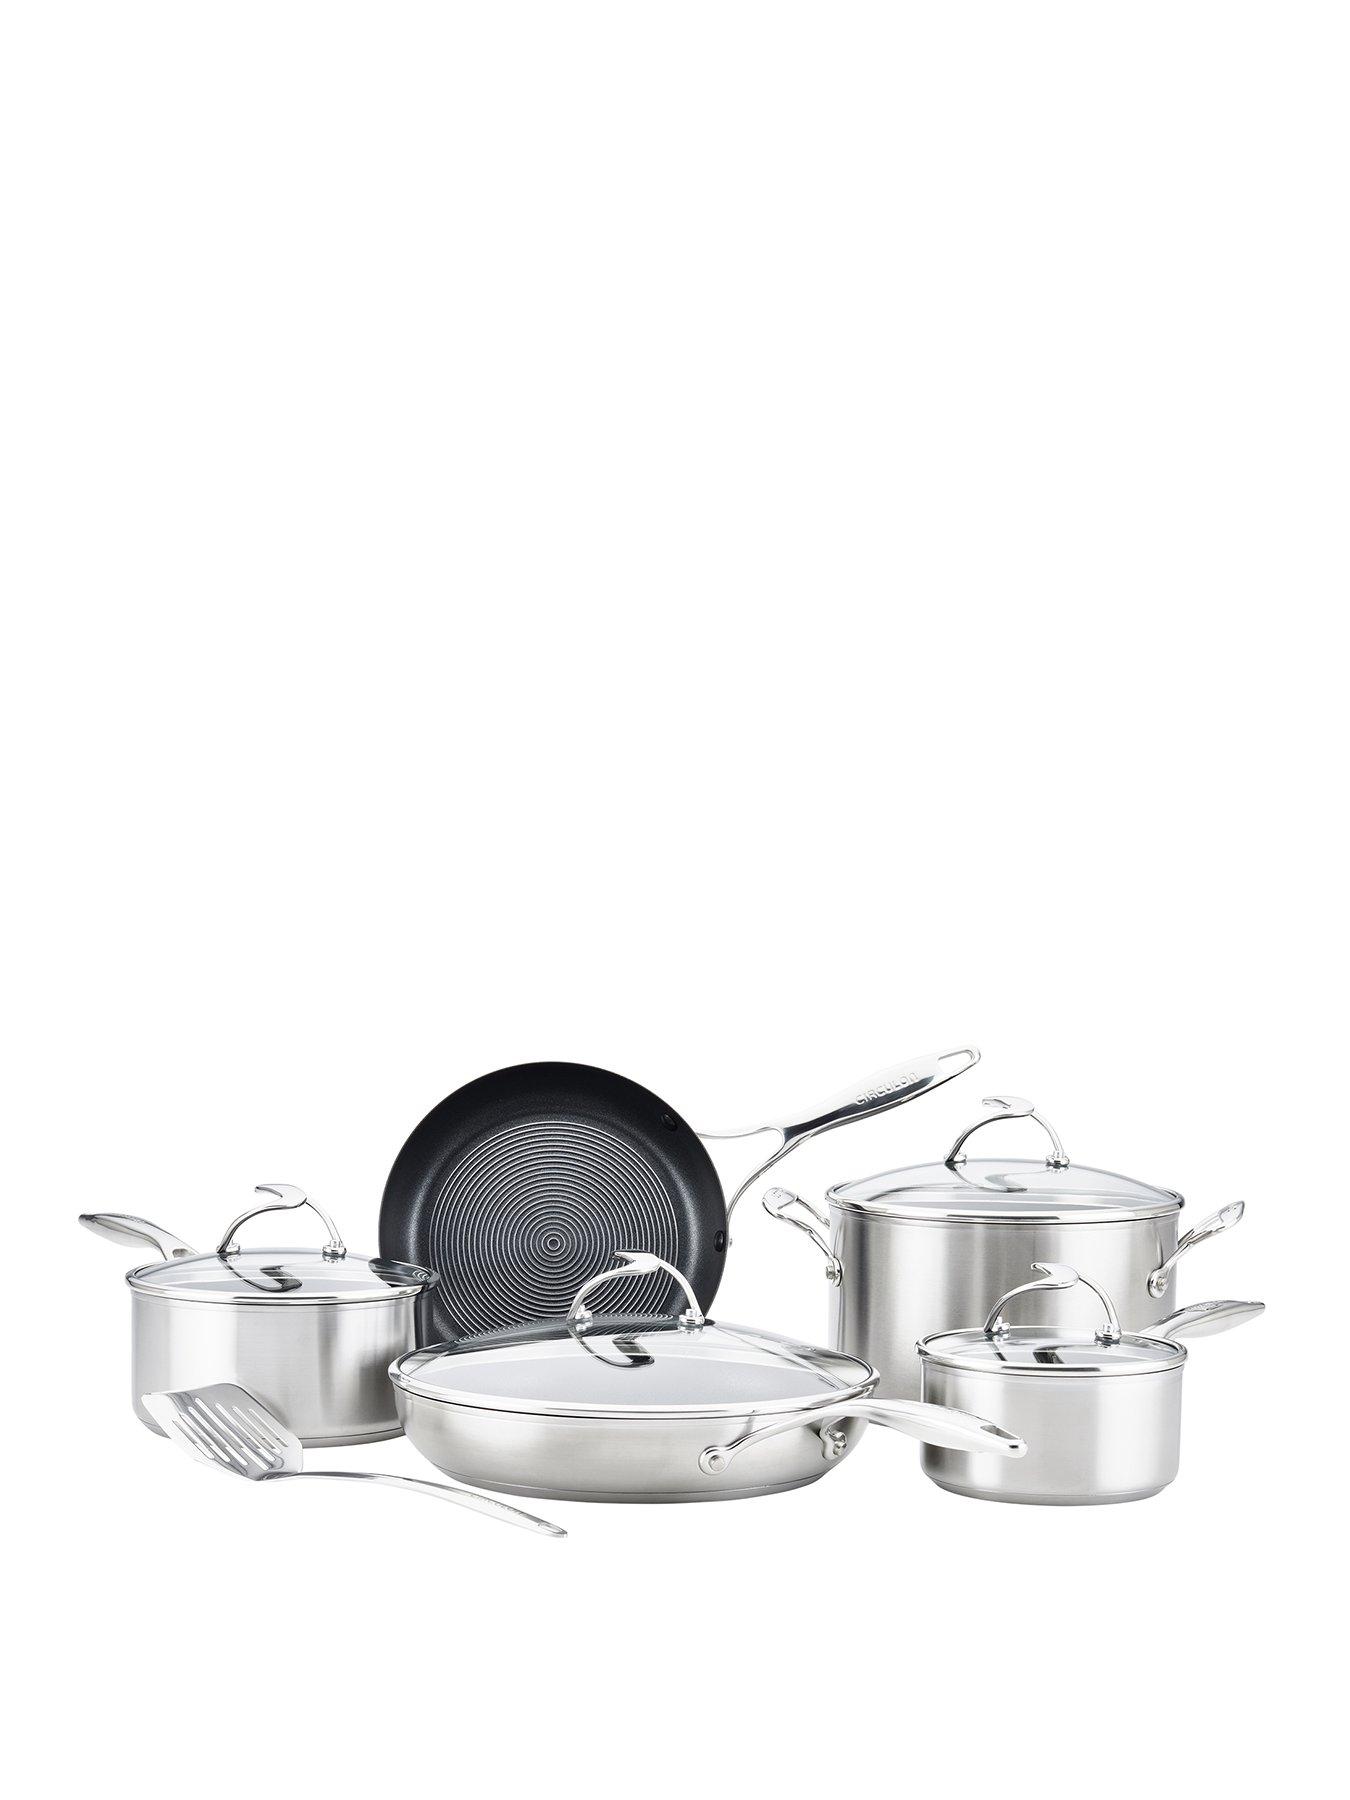 Circulon Stainless Steel Induction Cookware Set with SteelShield